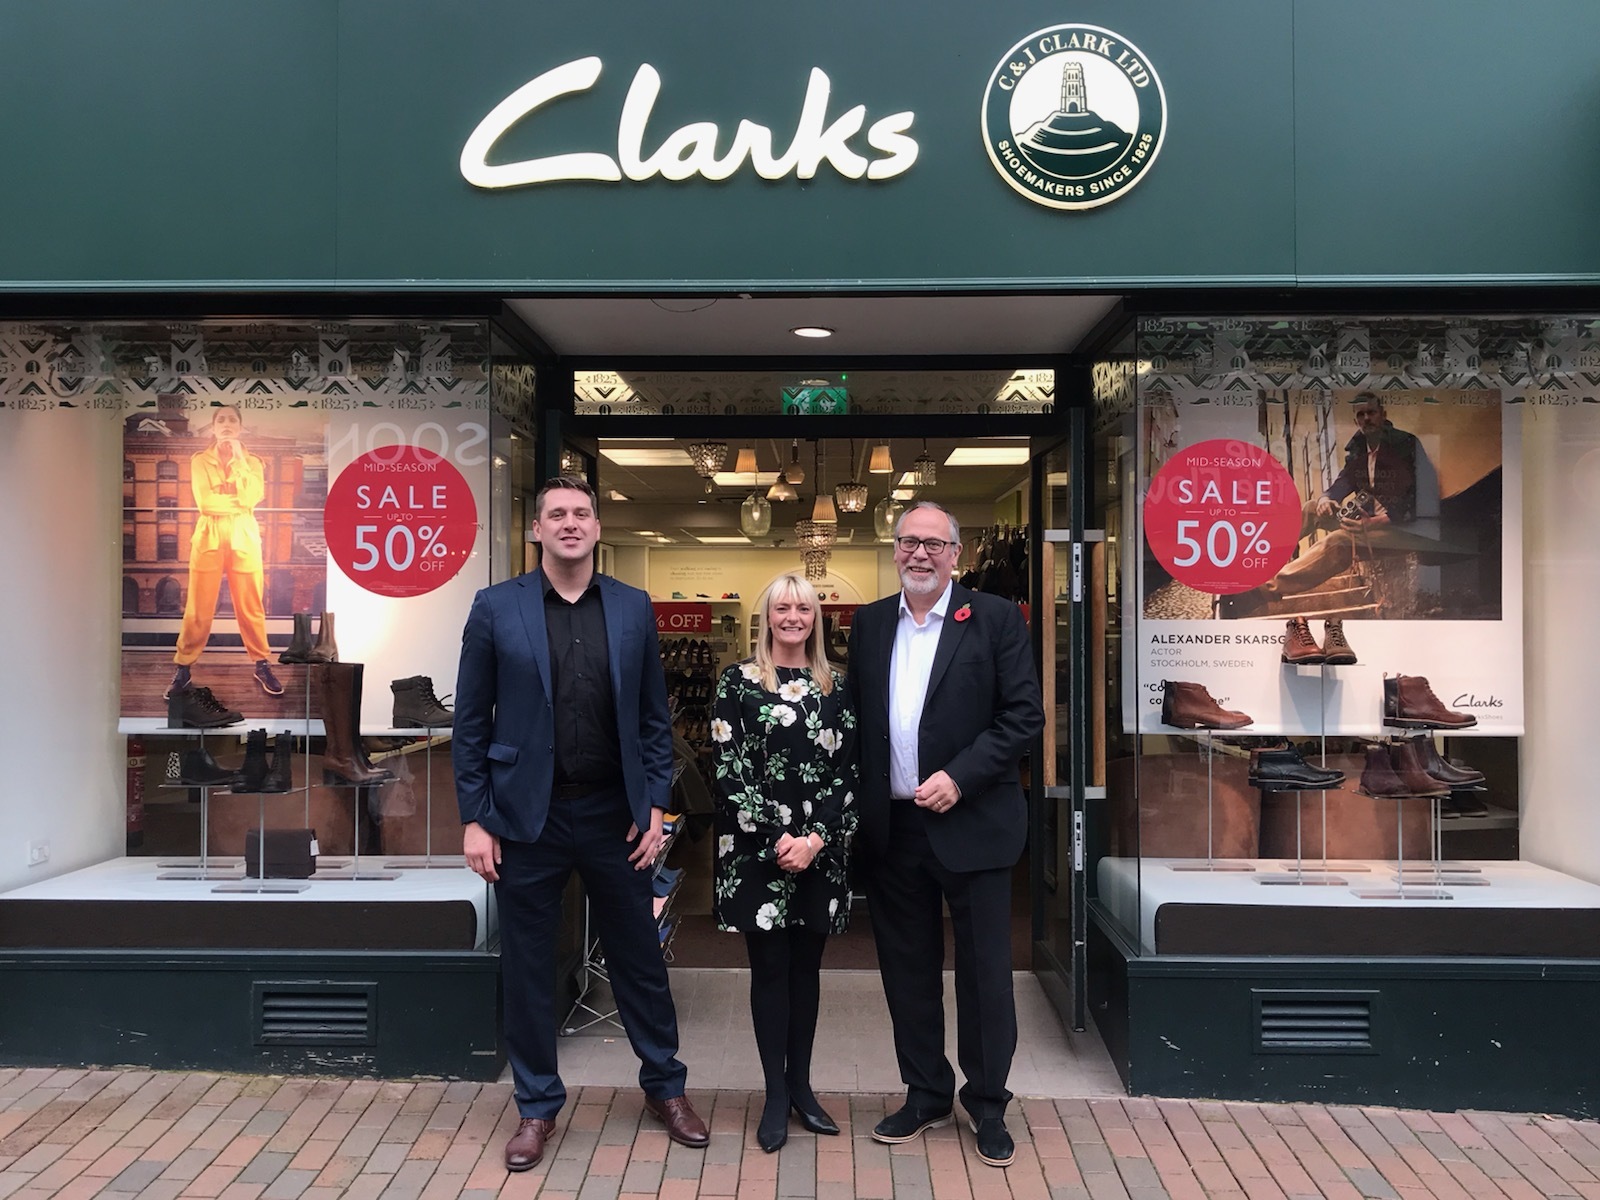 clarks shoes outlet stores locations uk